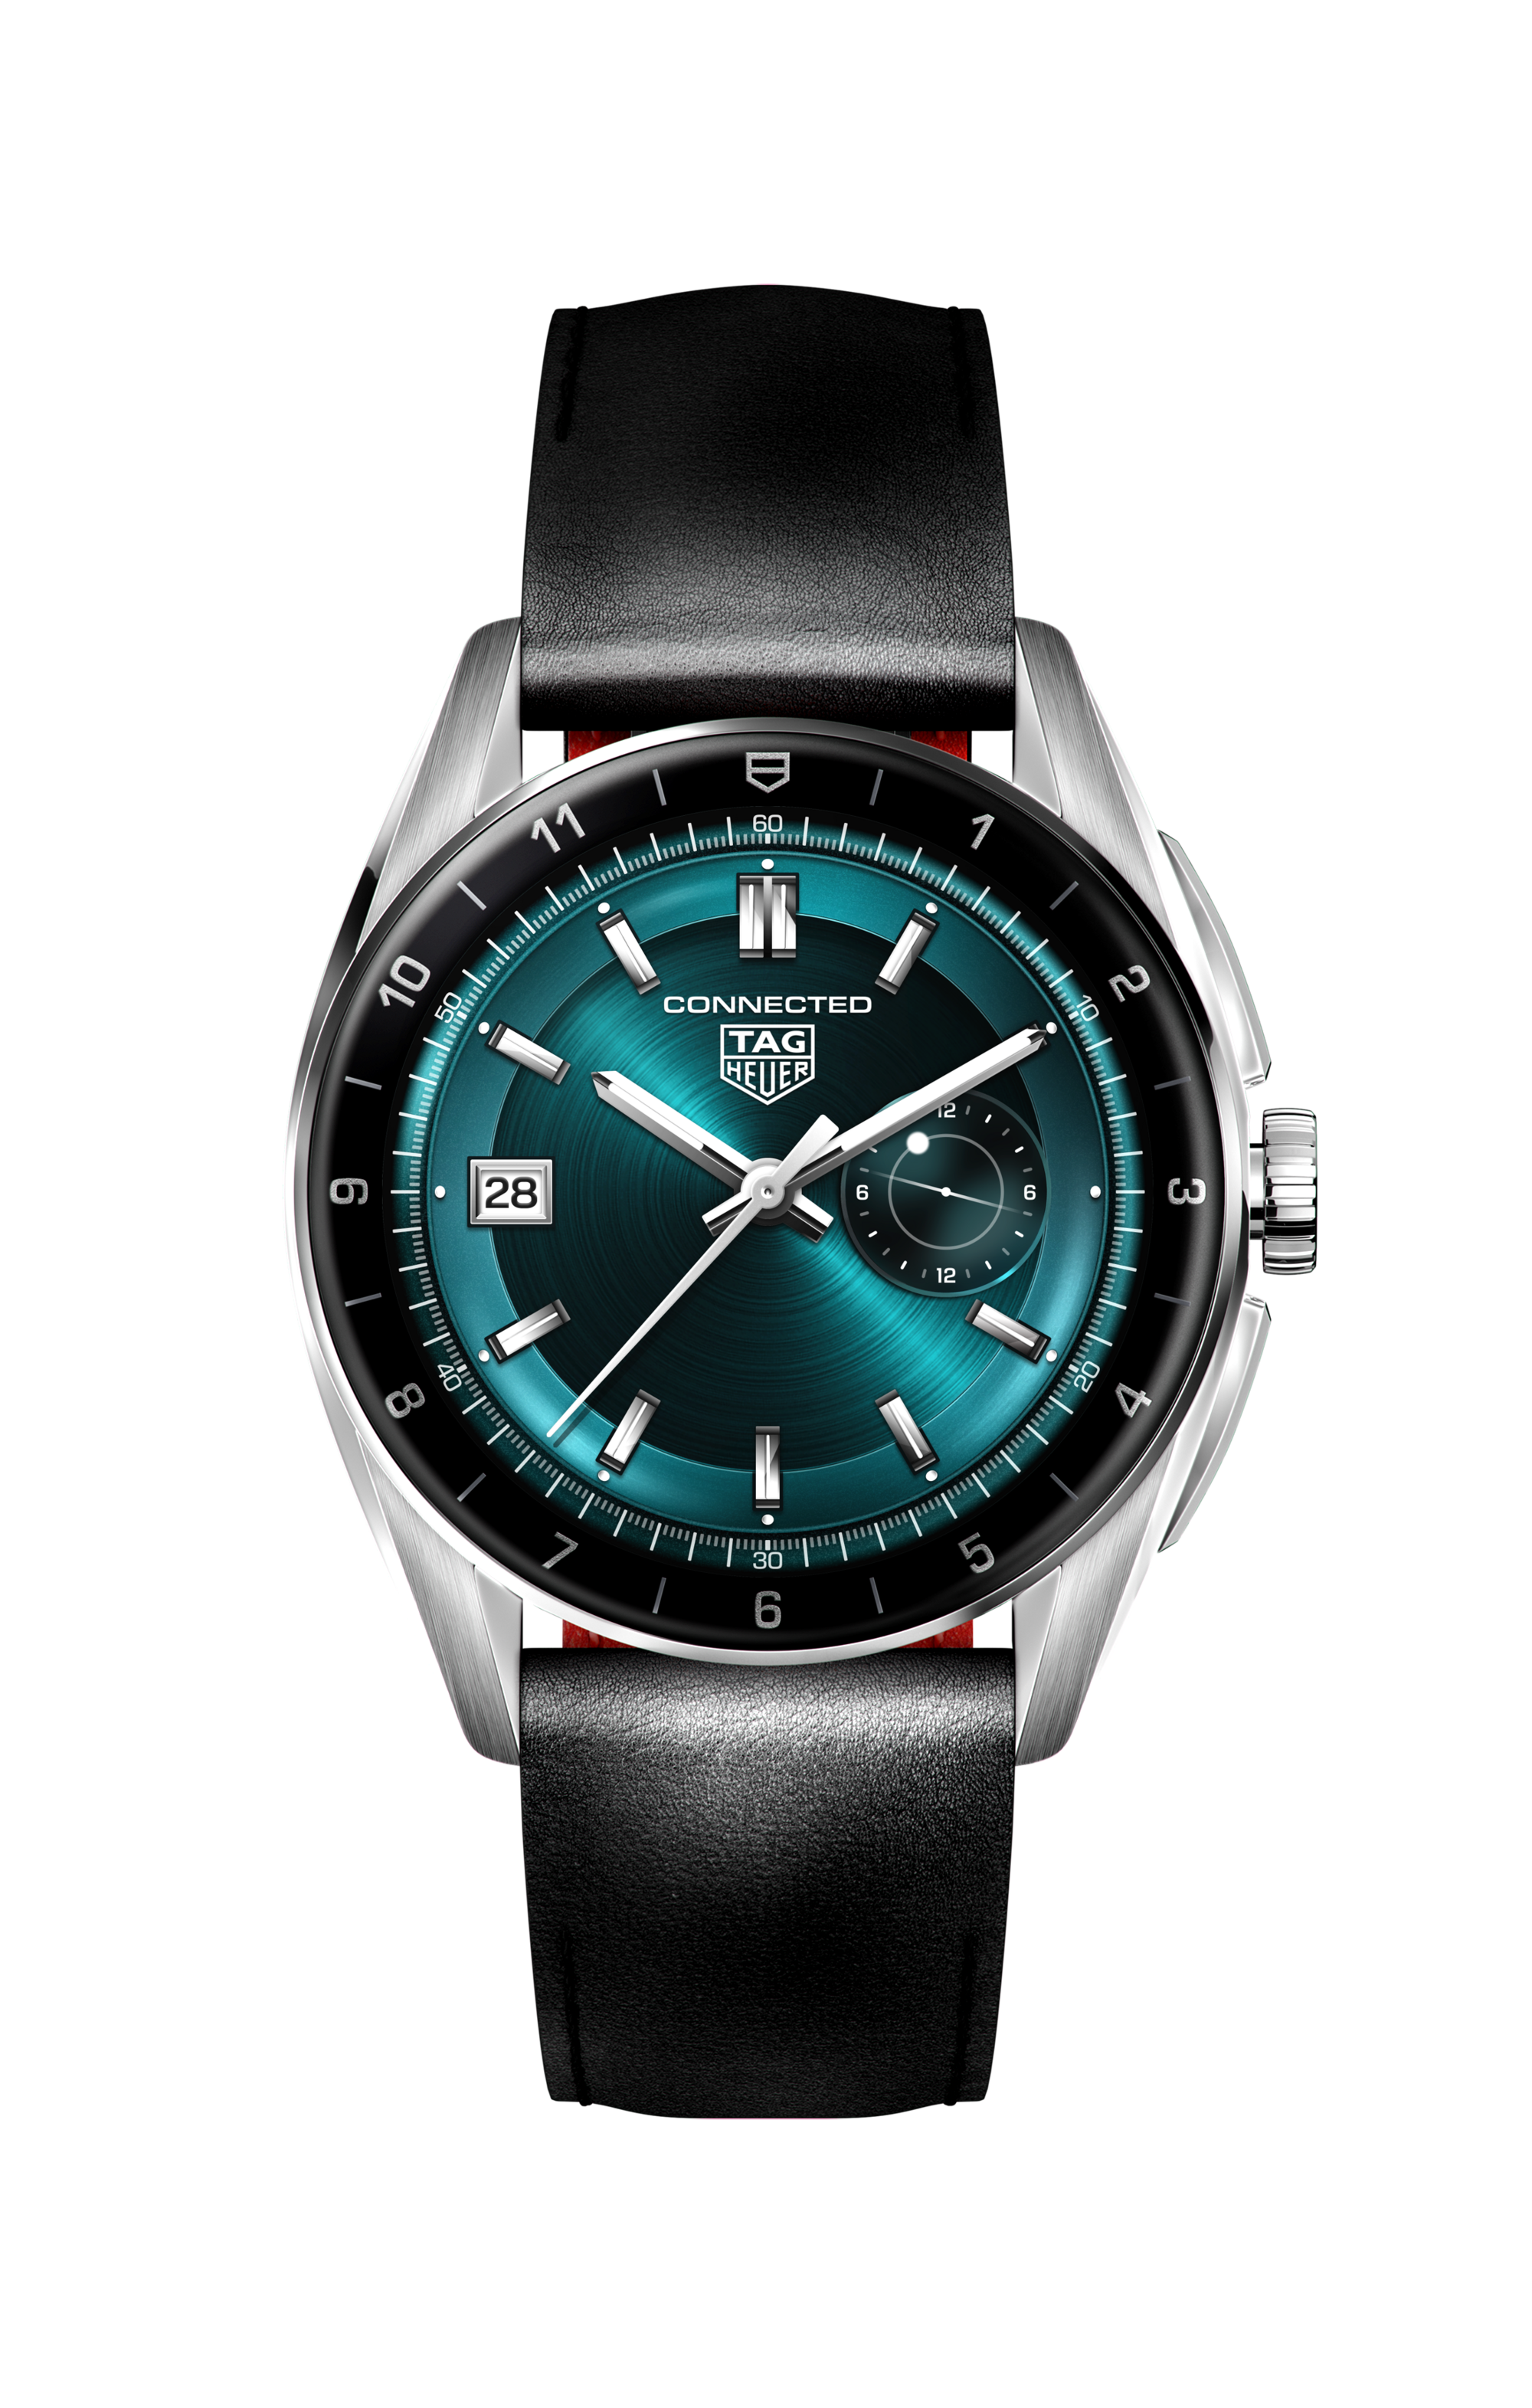 The TAG Heuer Monaco Story - The Watch Collectors' Club